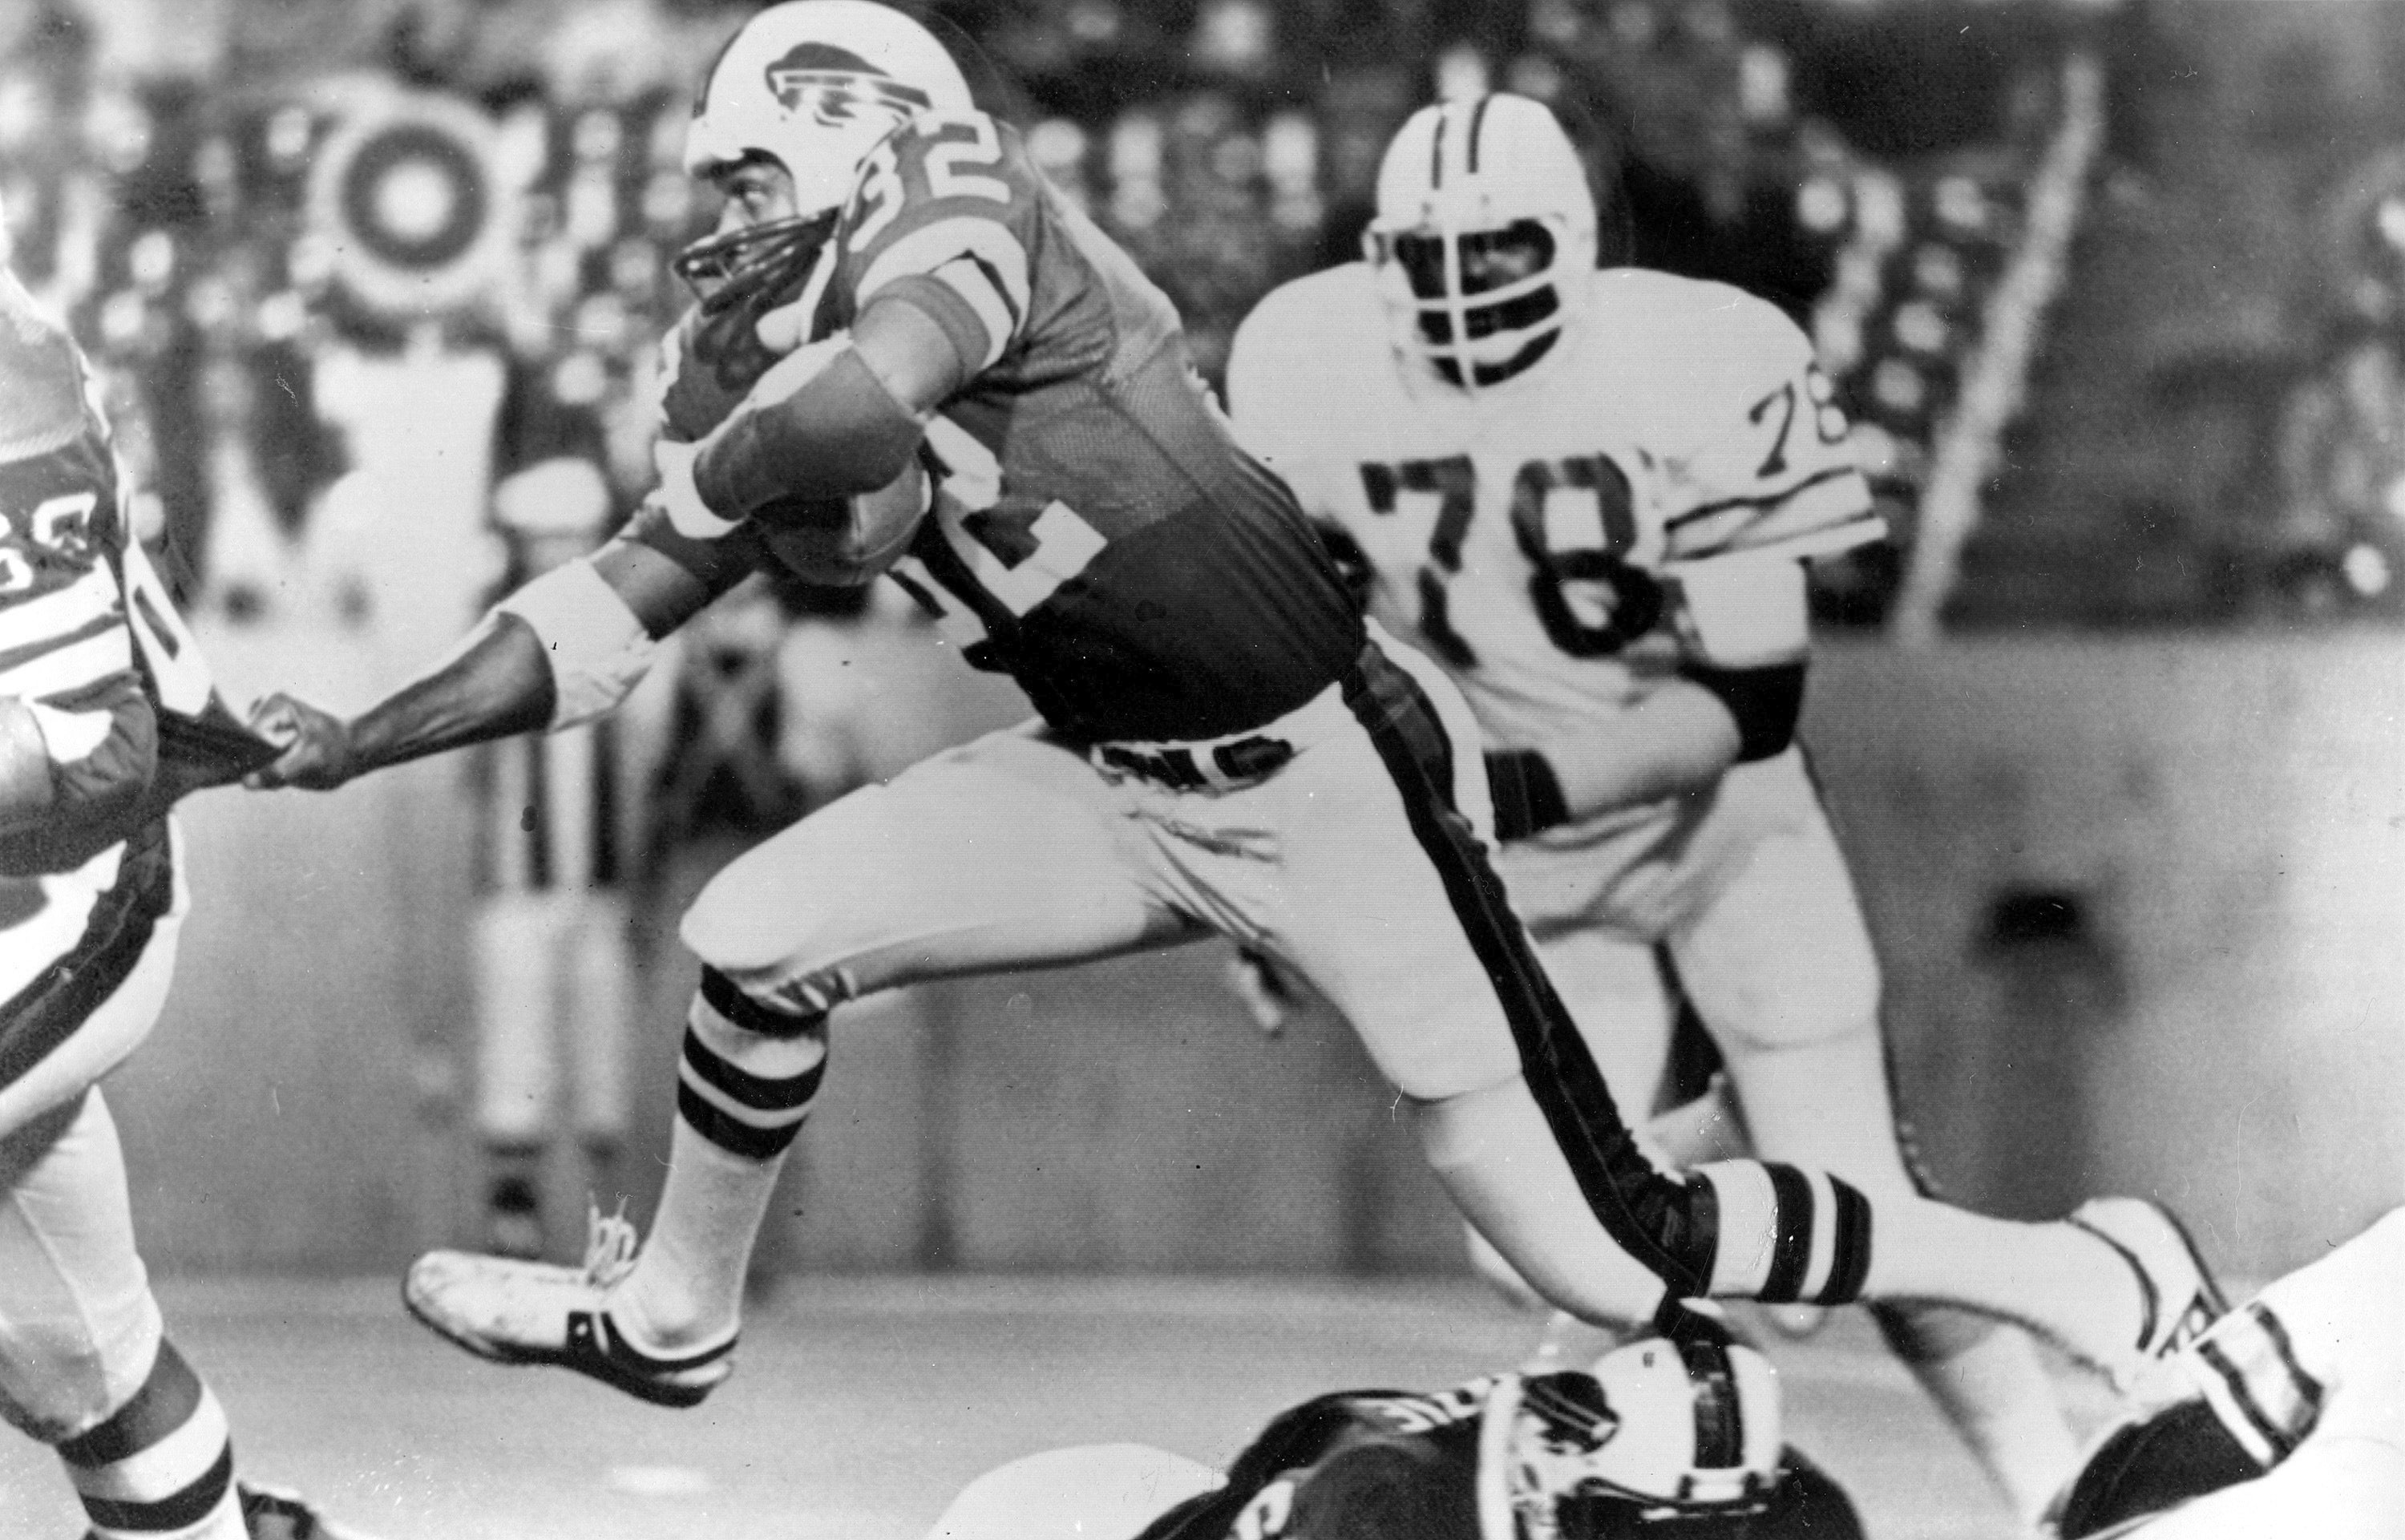 Simpson plays running back for the Buffalo Bills in 1977